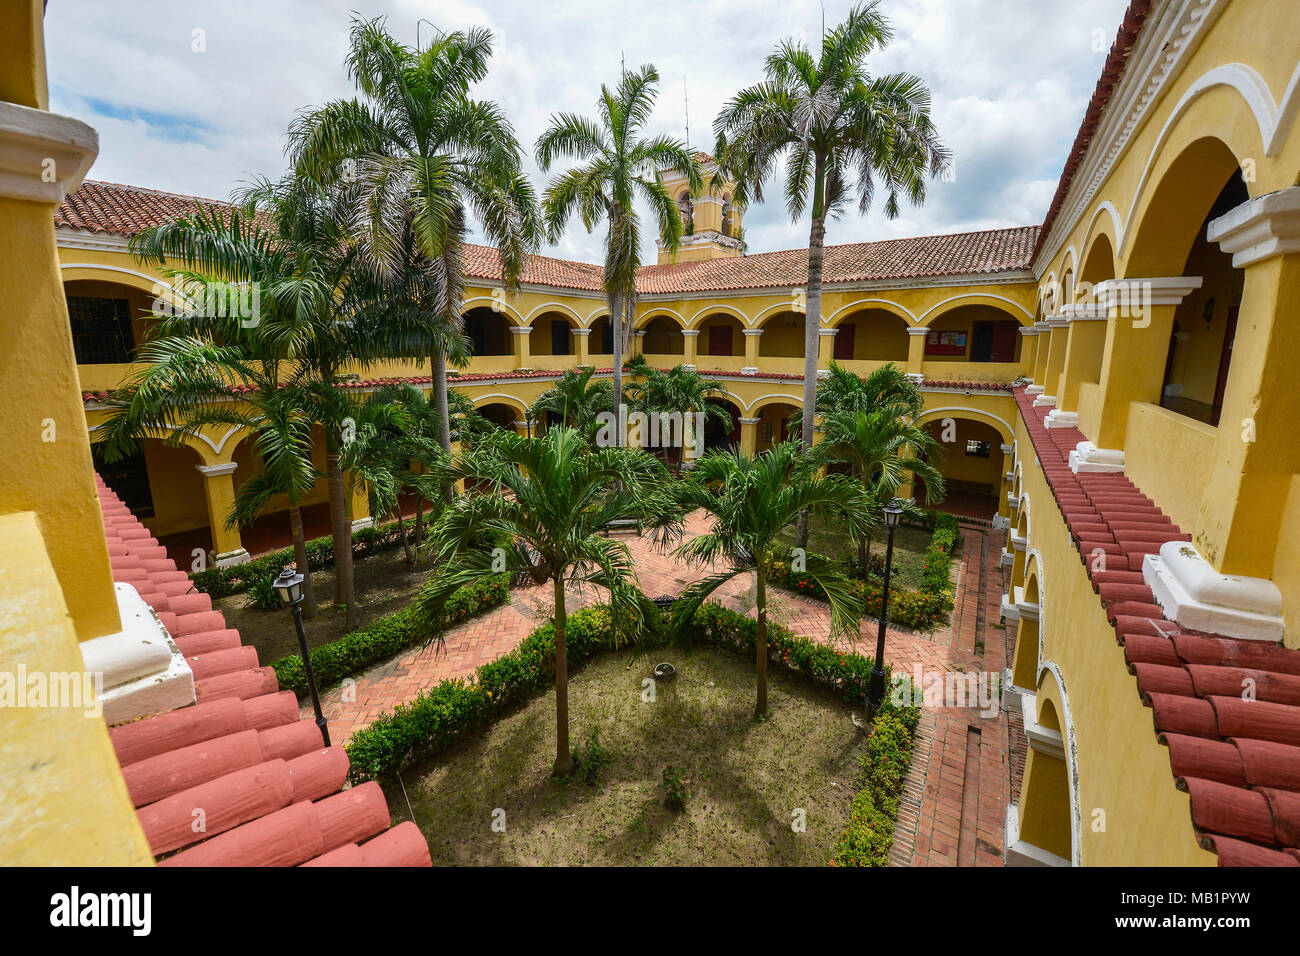 City hall in Mompox. City founded in 1540 and listed as World Heritage by UNESCO. Colombia. Stock Photo